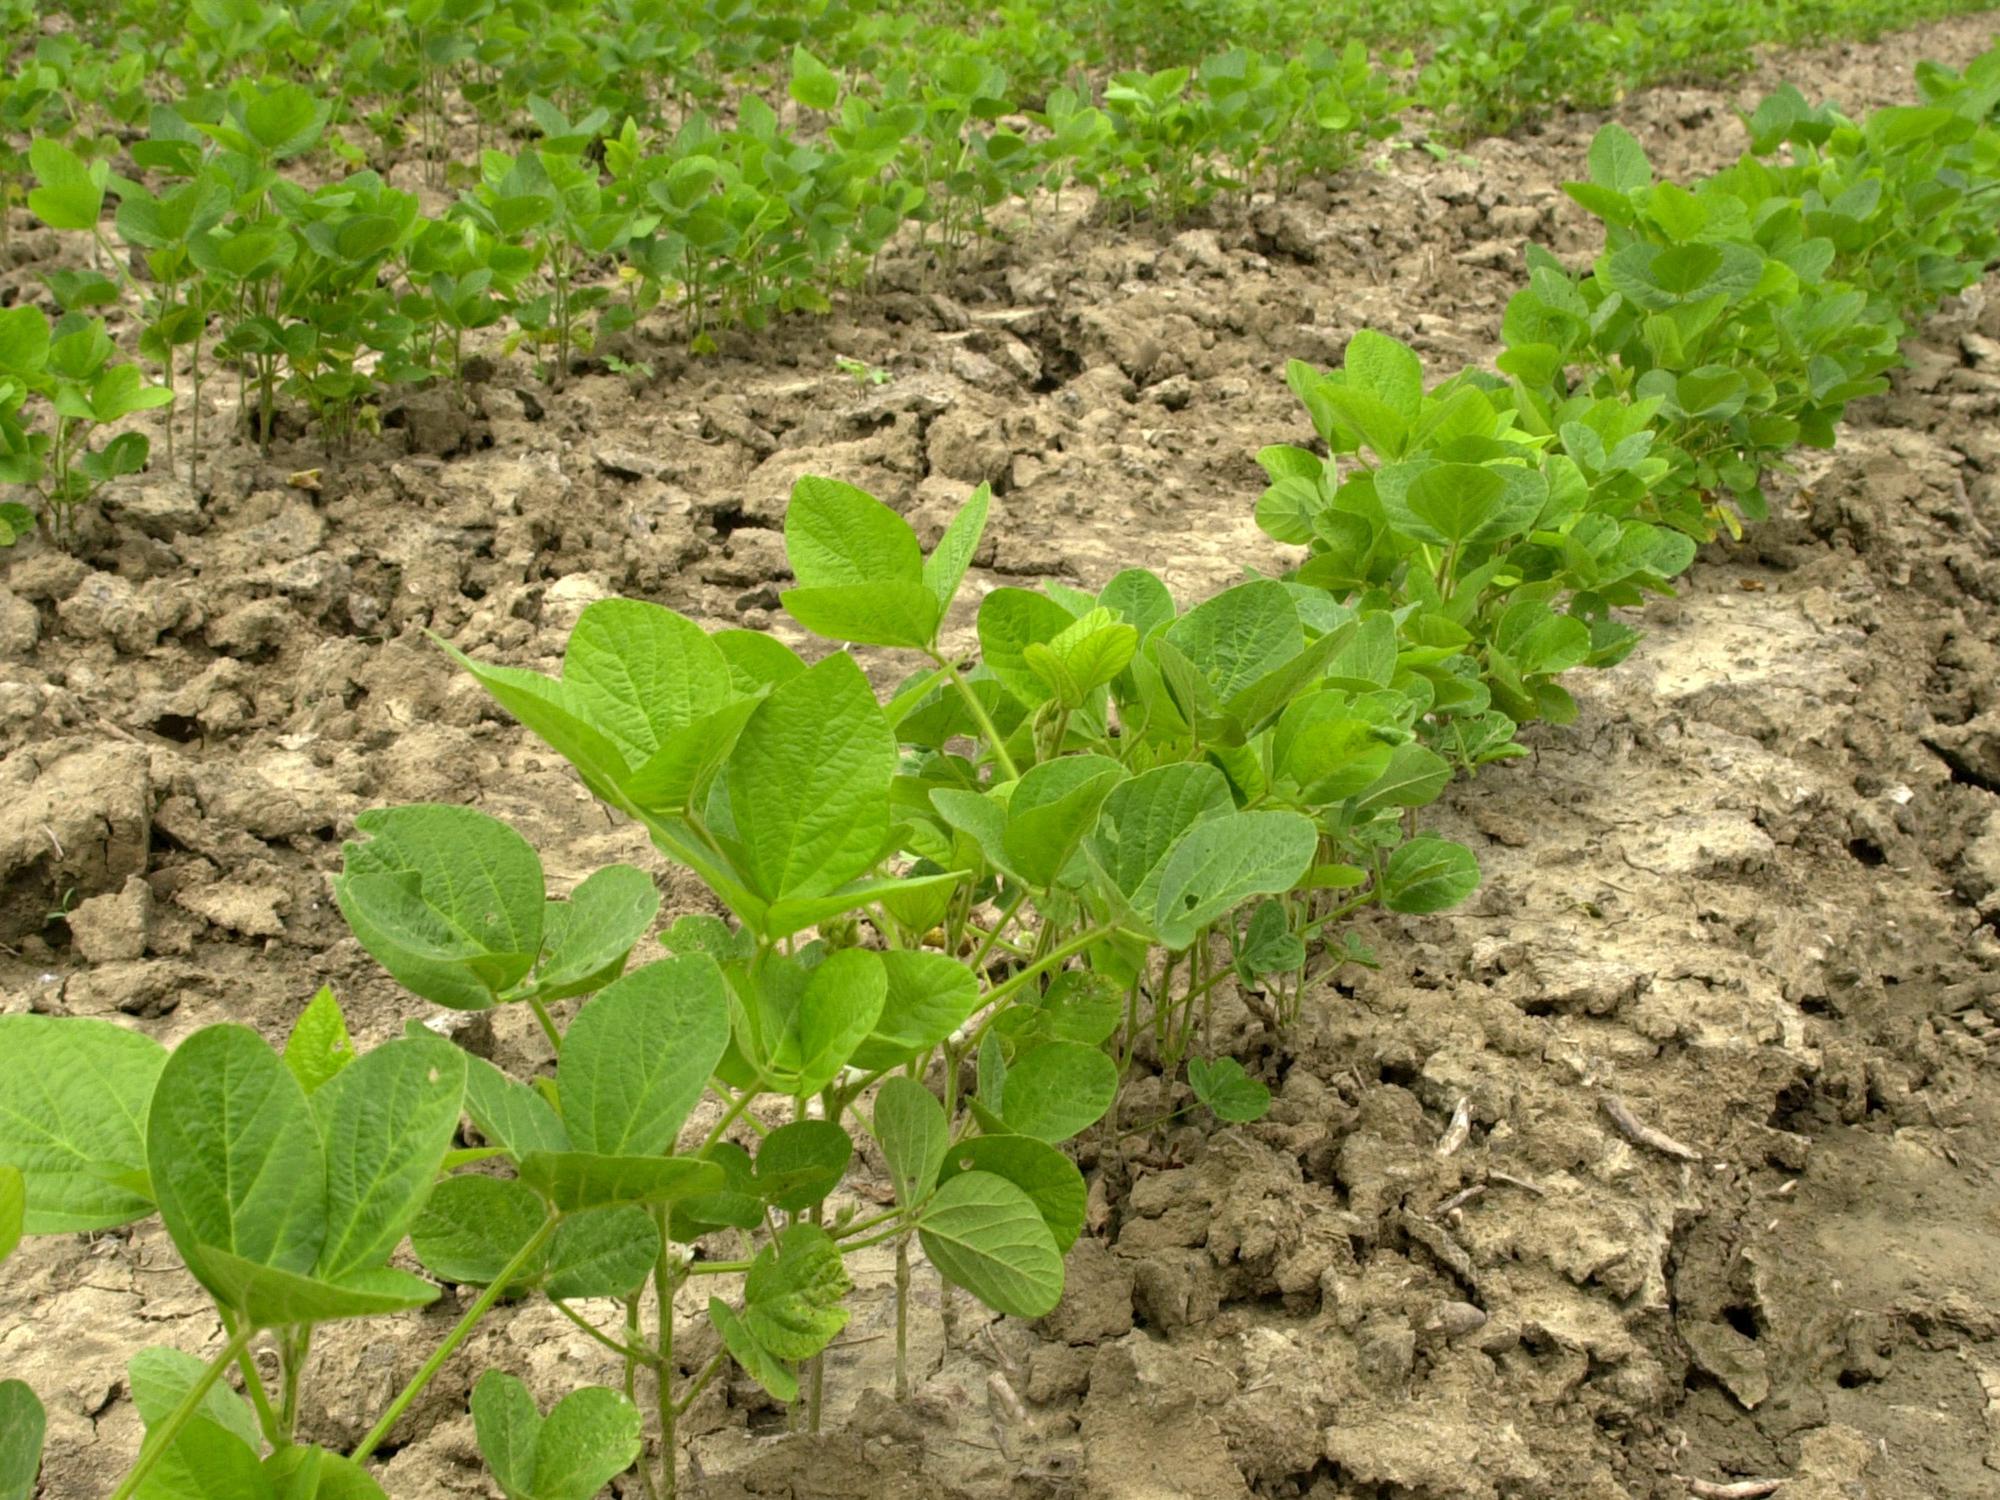 A week of mostly good planting weather helped growers make progress planting the state's soybean crop. By May 26, about 32 percent had emerged. In a typical year, nearly 80 percent of the crop would be out of the ground. (File Photo by MSU Ag Communications/Marco Nicovich)